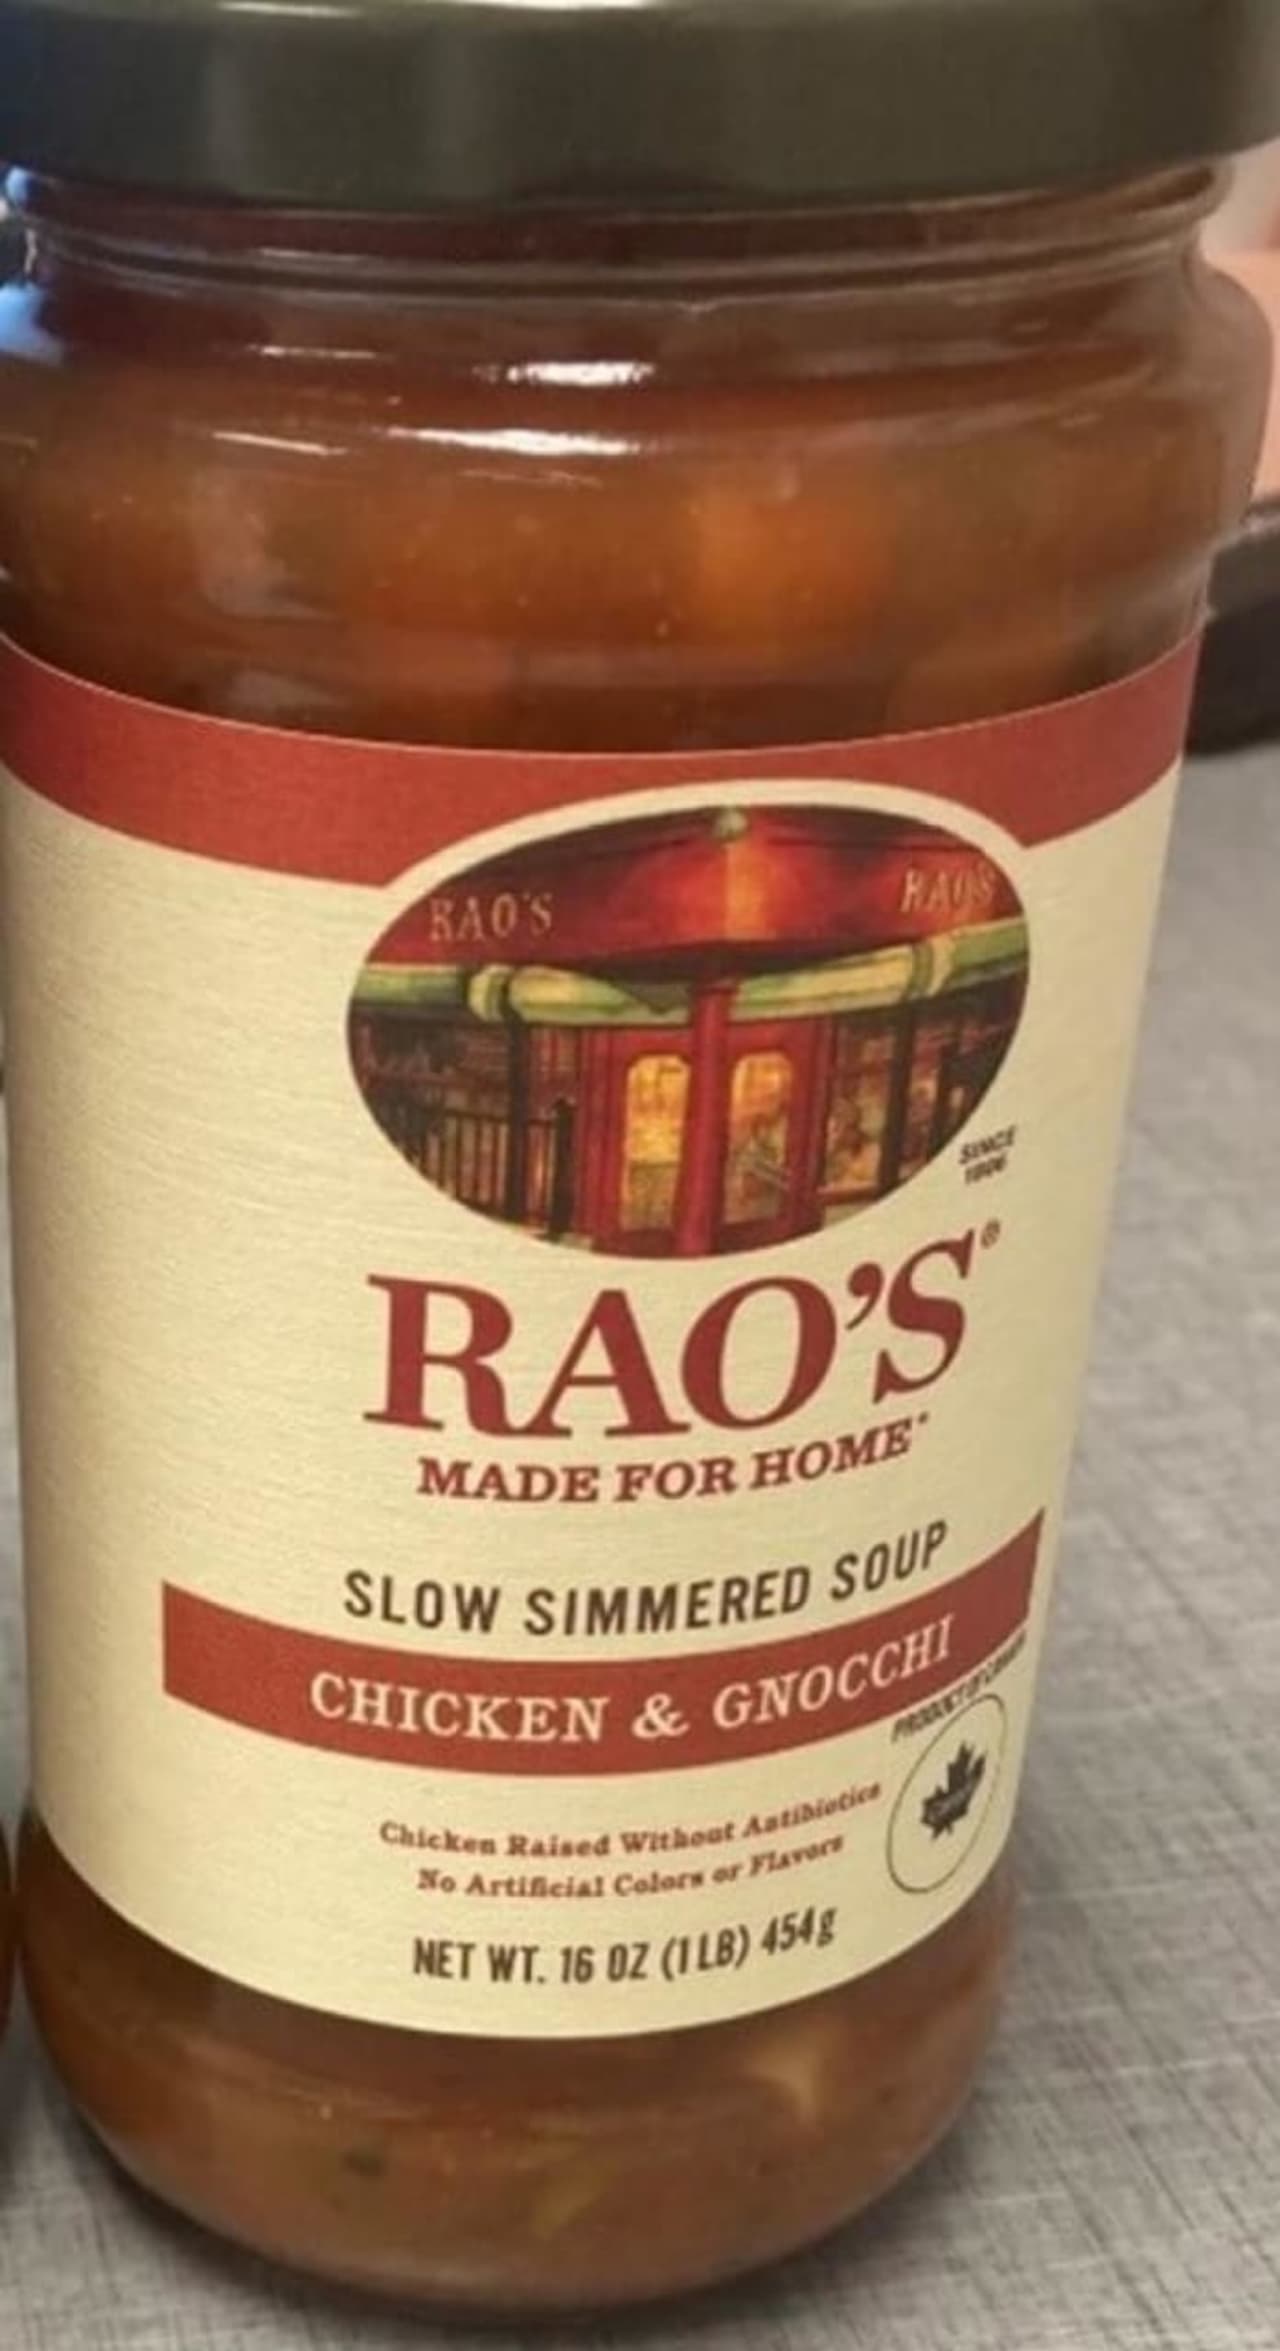 16-ounce jars of Rao’s Made for Home Slow Simmered Soup, Chicken & Gnocchi.